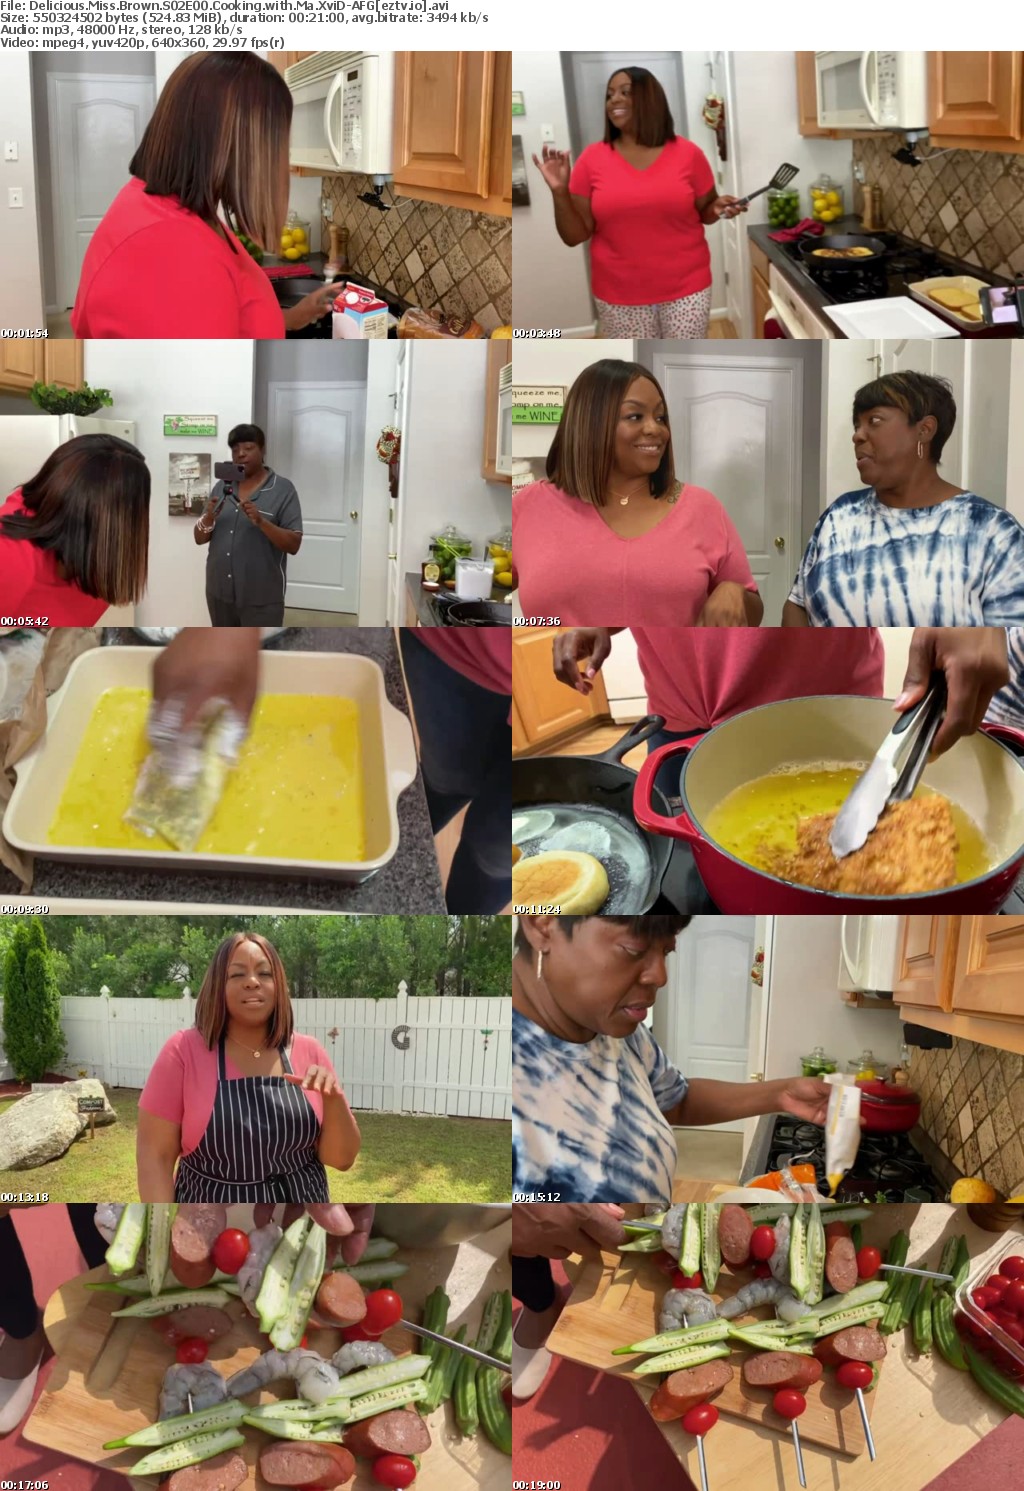 Delicious Miss Brown S02E00 Cooking with Ma XviD-AFG